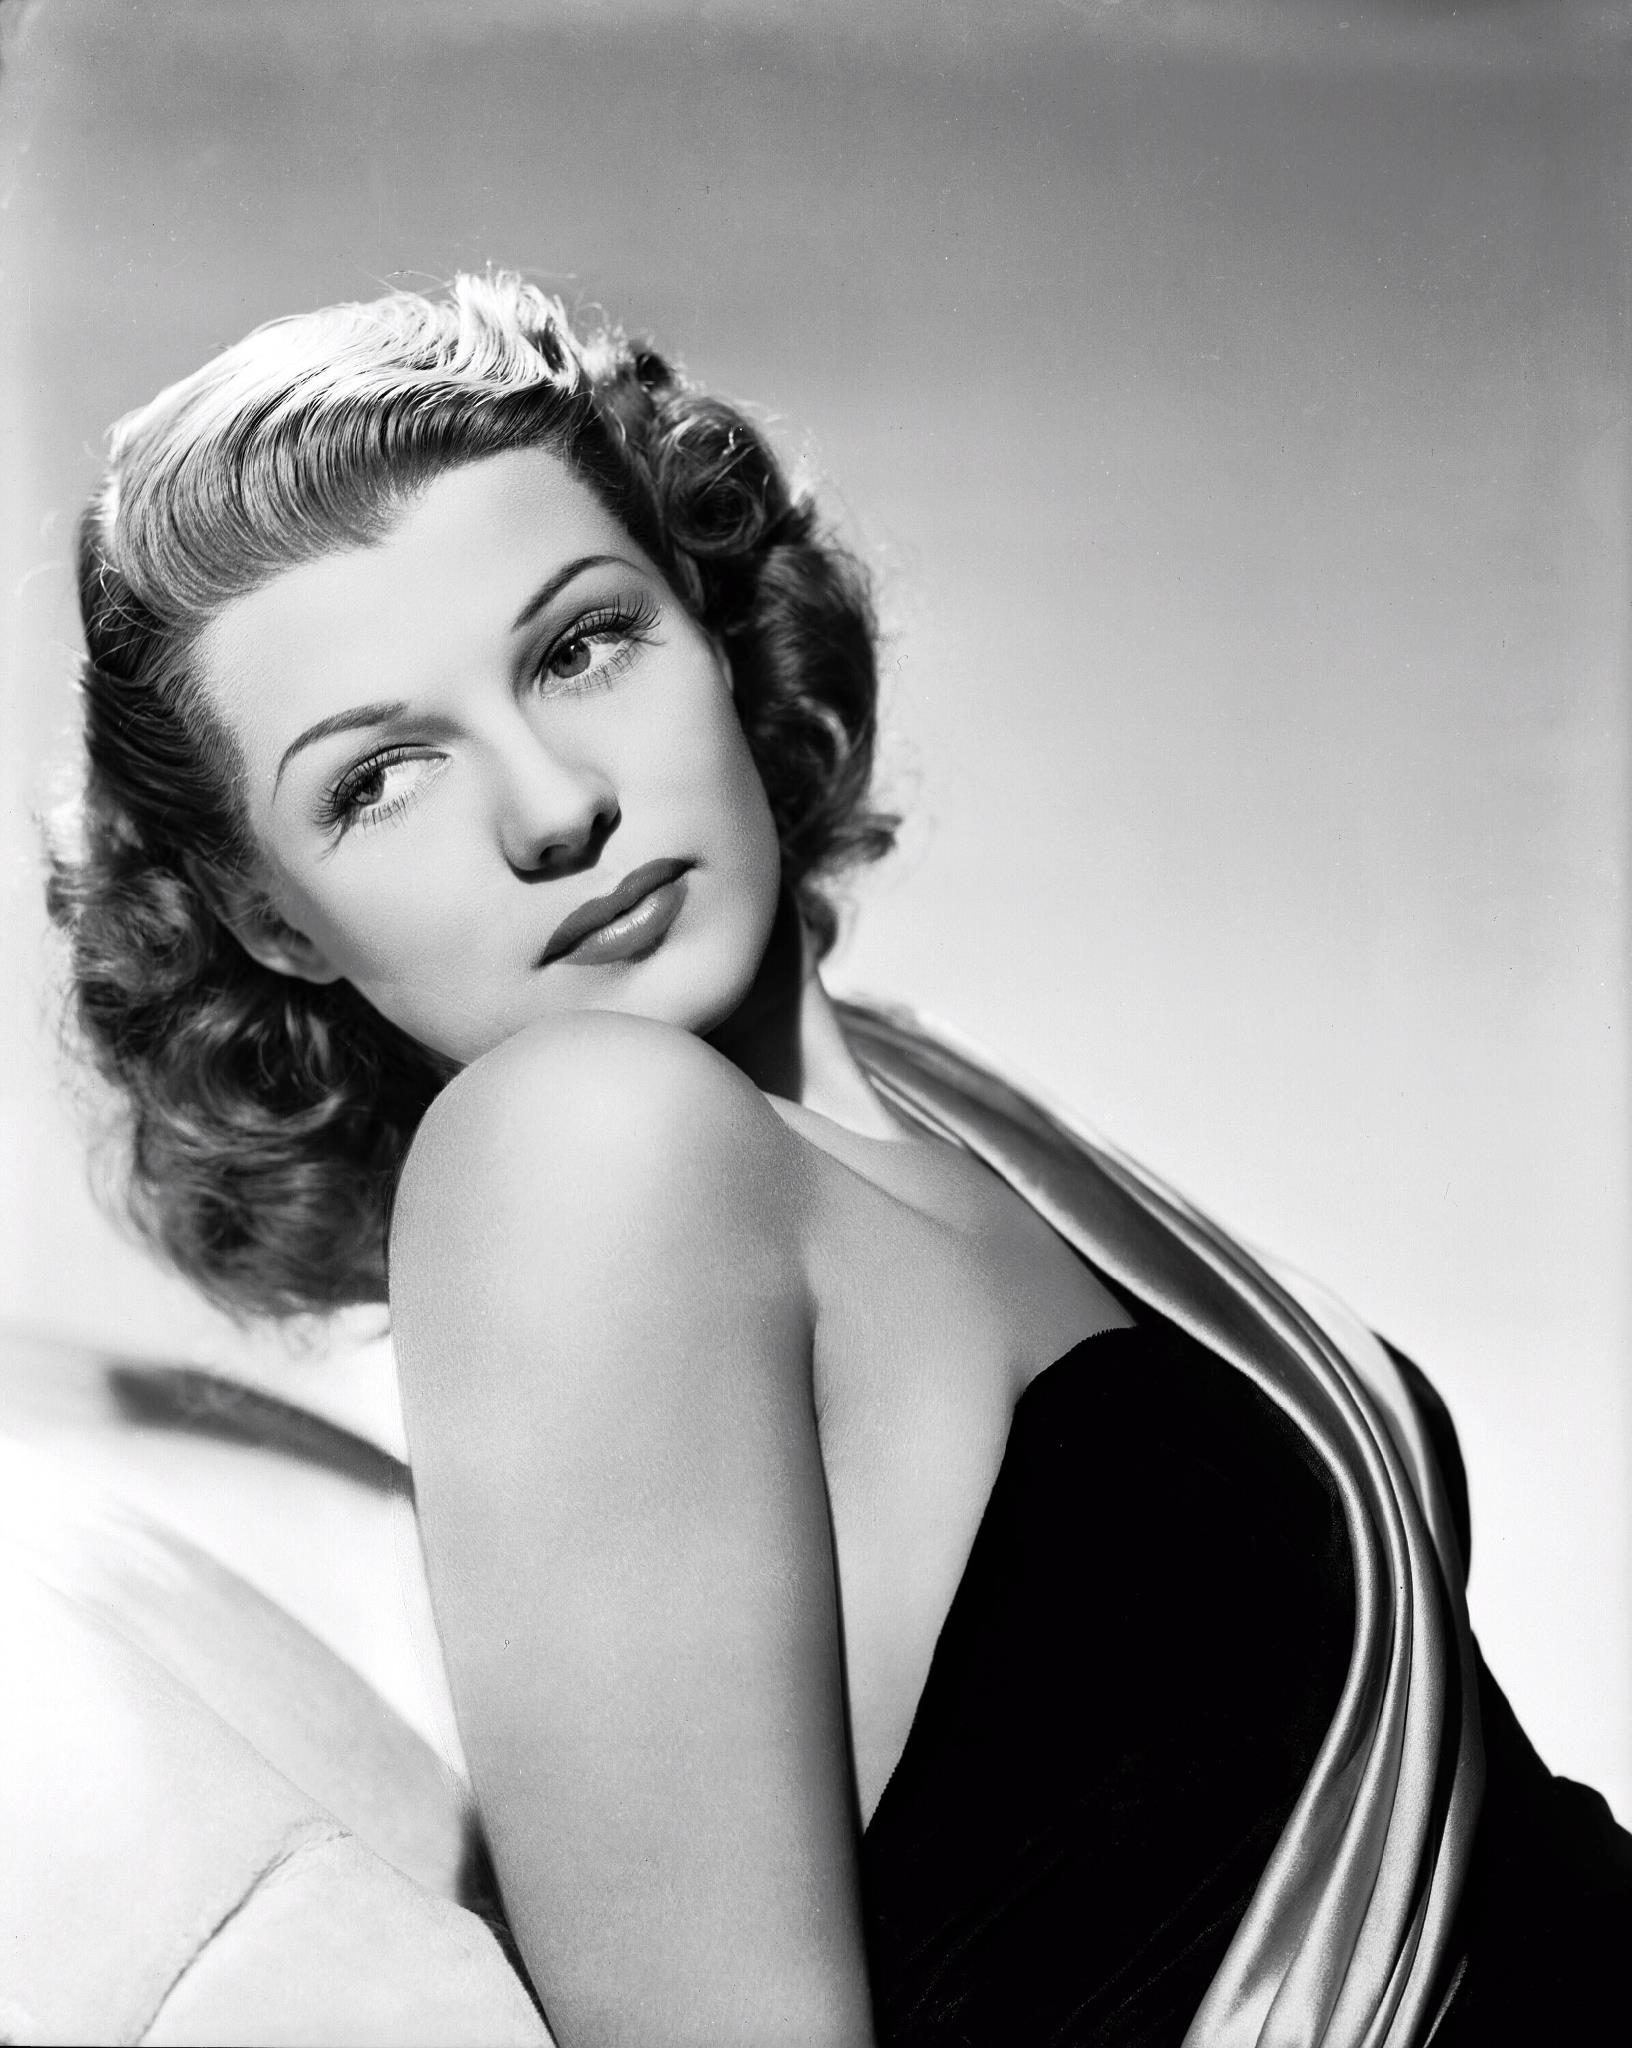 RITA HAYWORTH. The actress had a tumultuous relationship with Prince Aly Khan. Photo from Facebook.com/tcmtv 